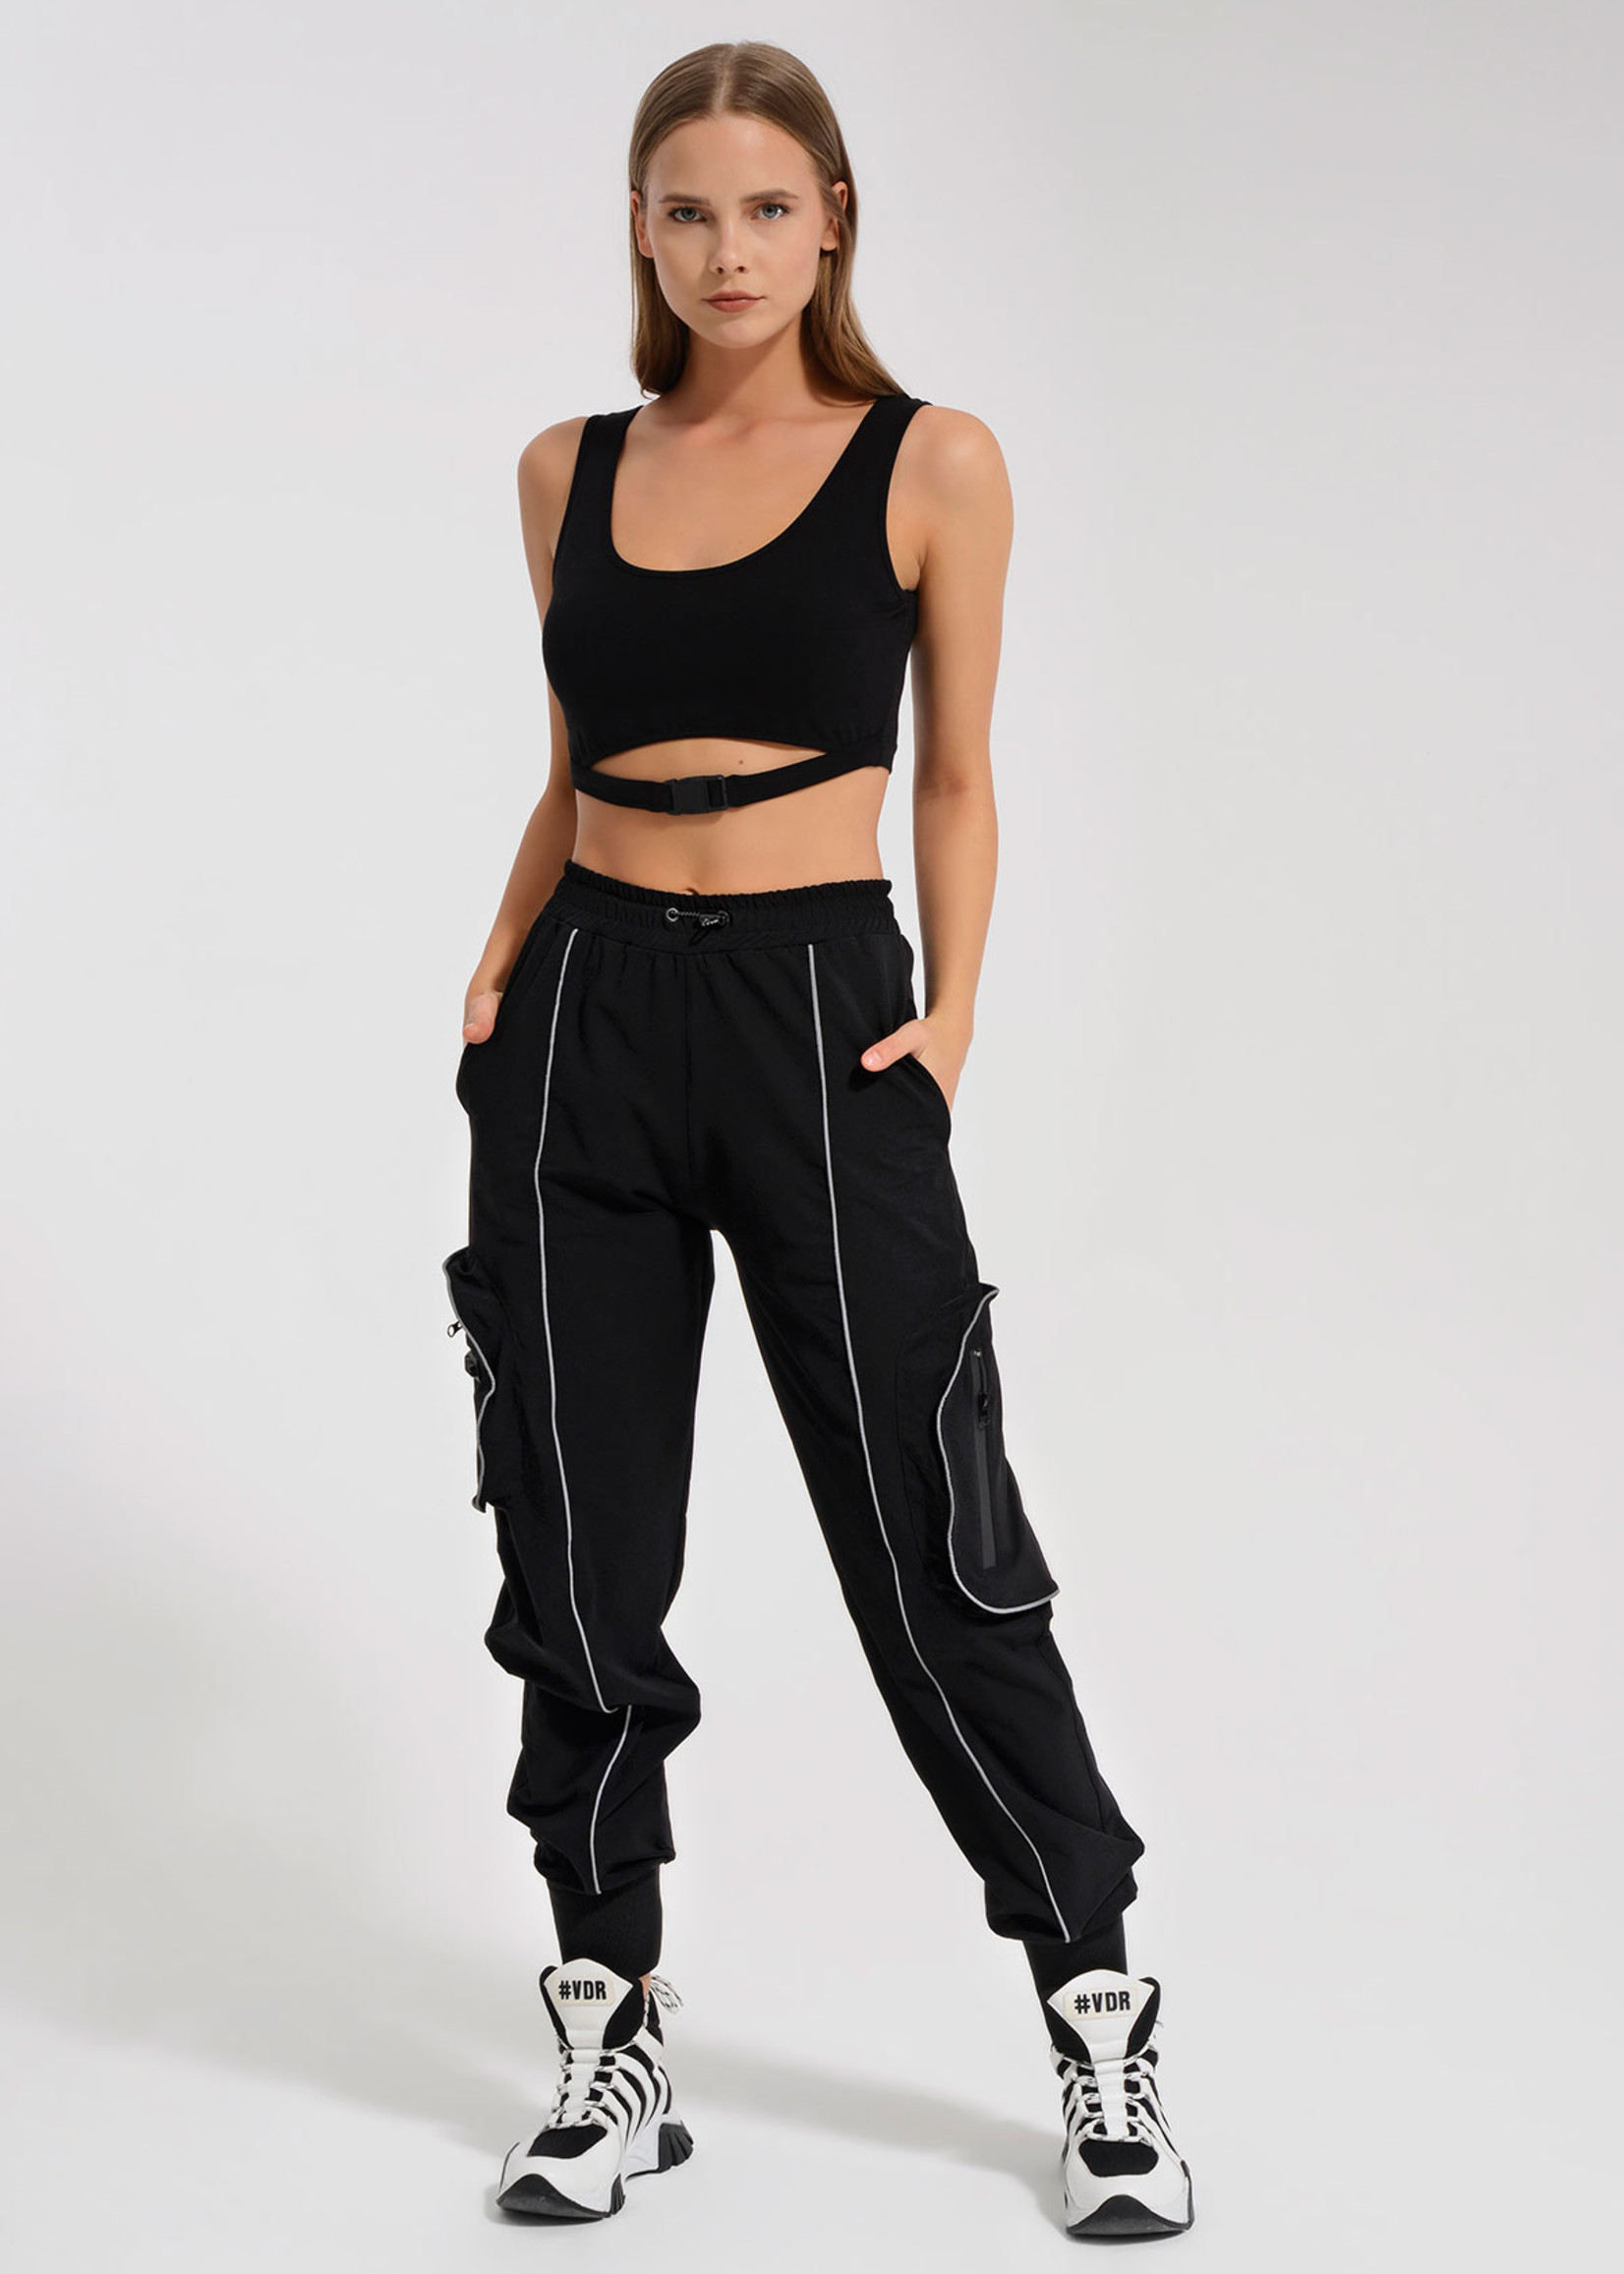 VDR WIRE LINE JOGGERS 8433